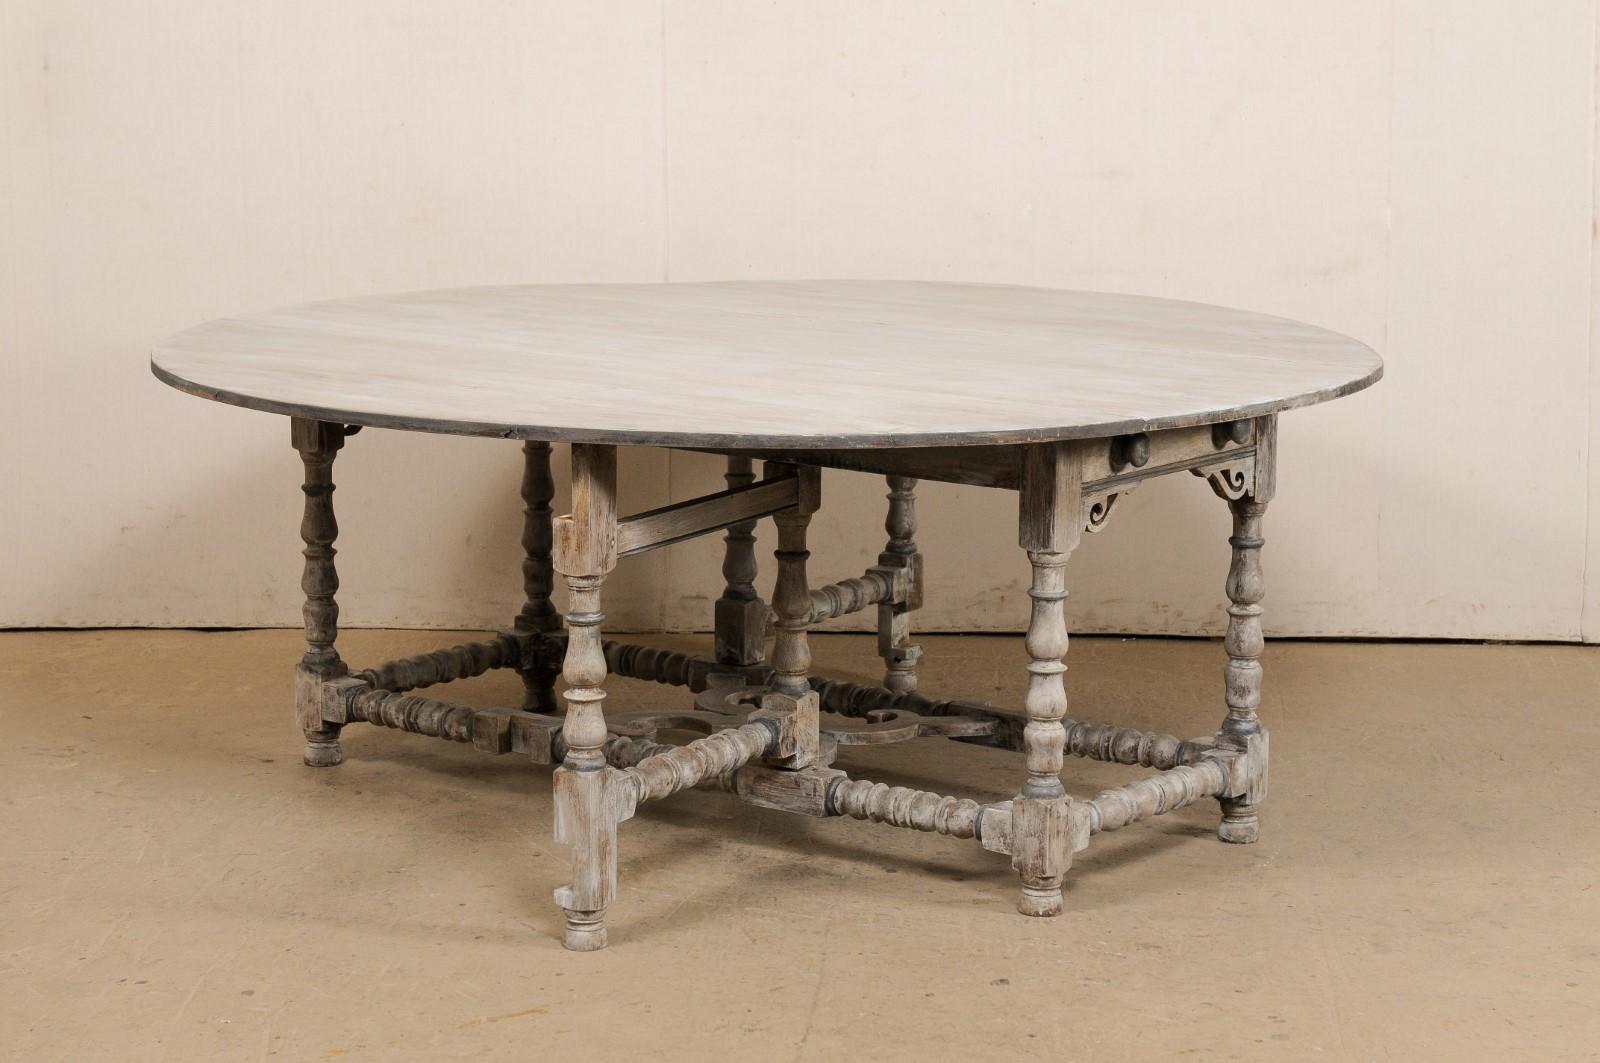 An English double gate-leg, round-shaped table with drawer from the early 20th century. This antique table from England features a large round-shaped top with two drop leaves flanking either side, which when down, make this nicely sized table, a